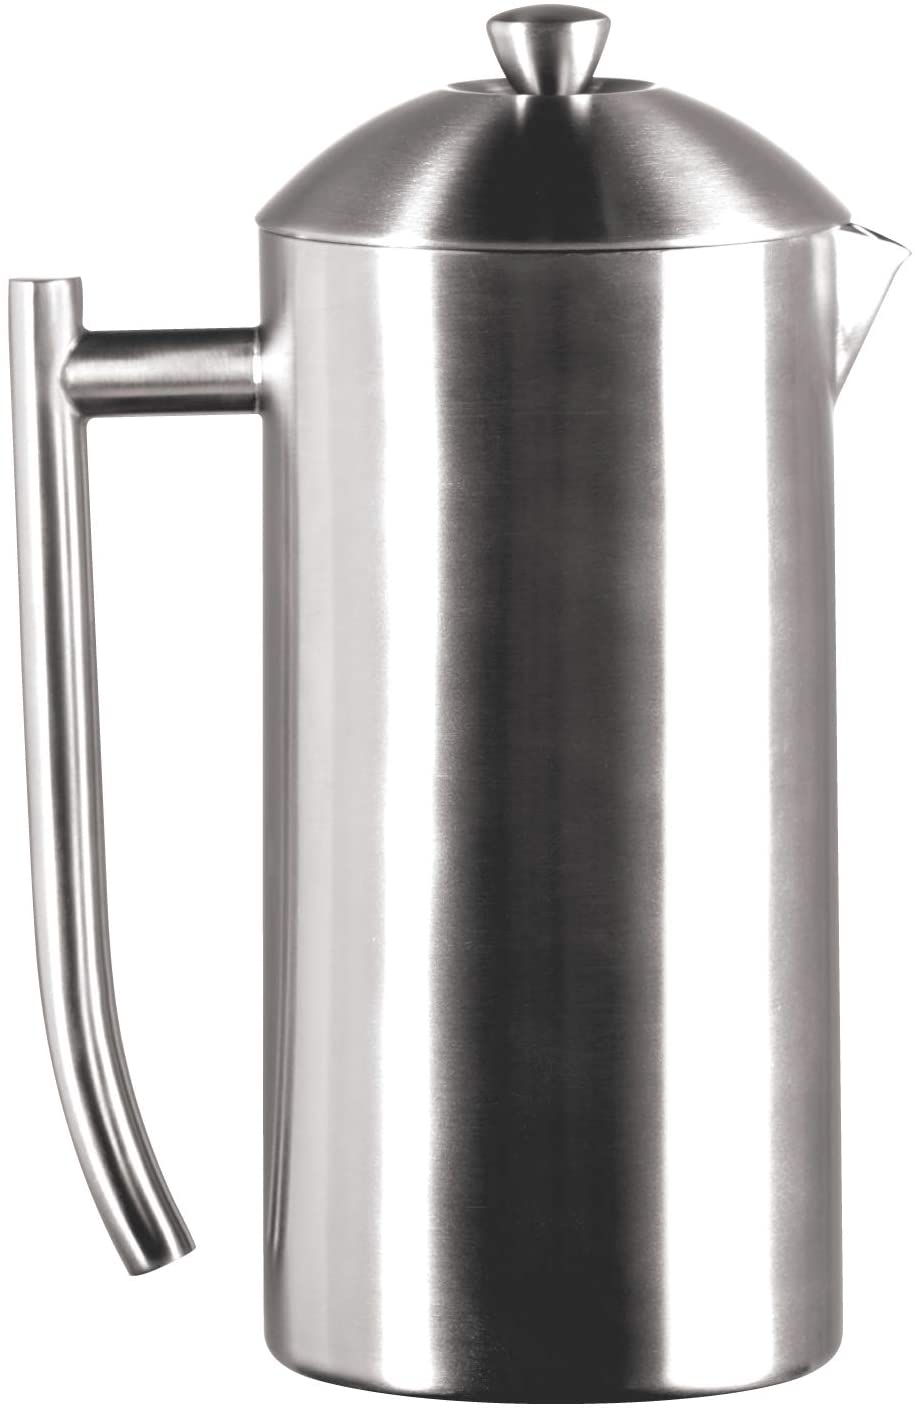 Frieling-Double-Walled-Stainless-Steel-French-Press-Coffee-Maker